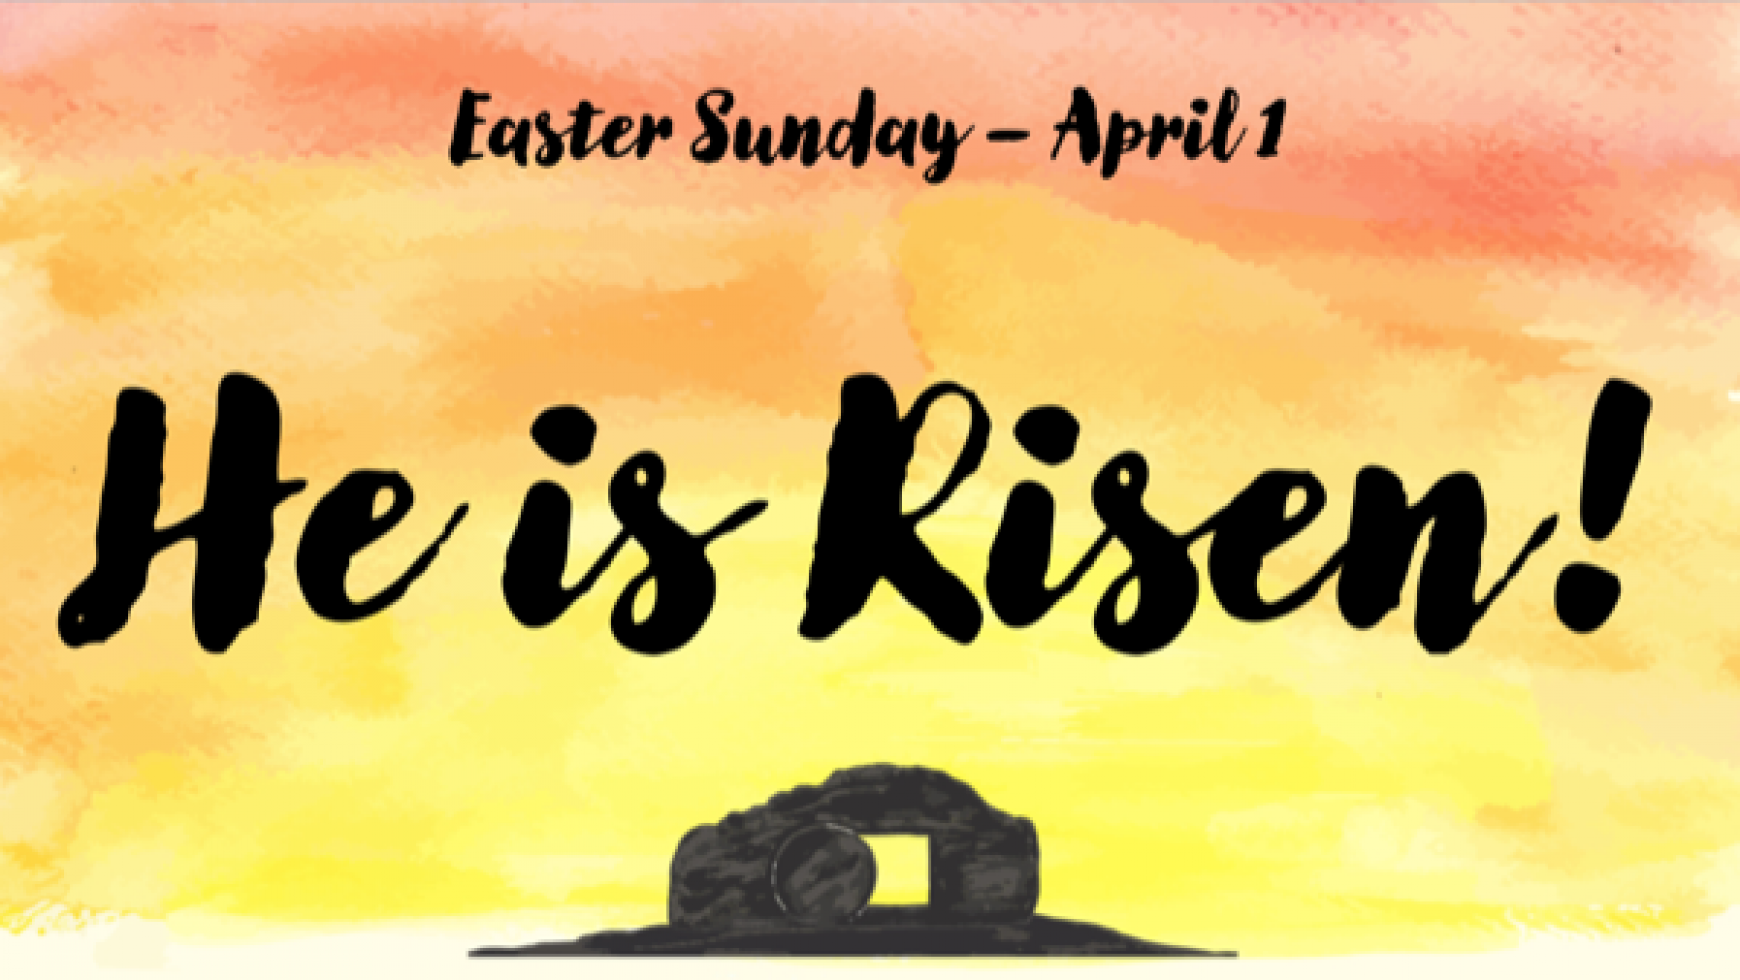 Easter Services Information